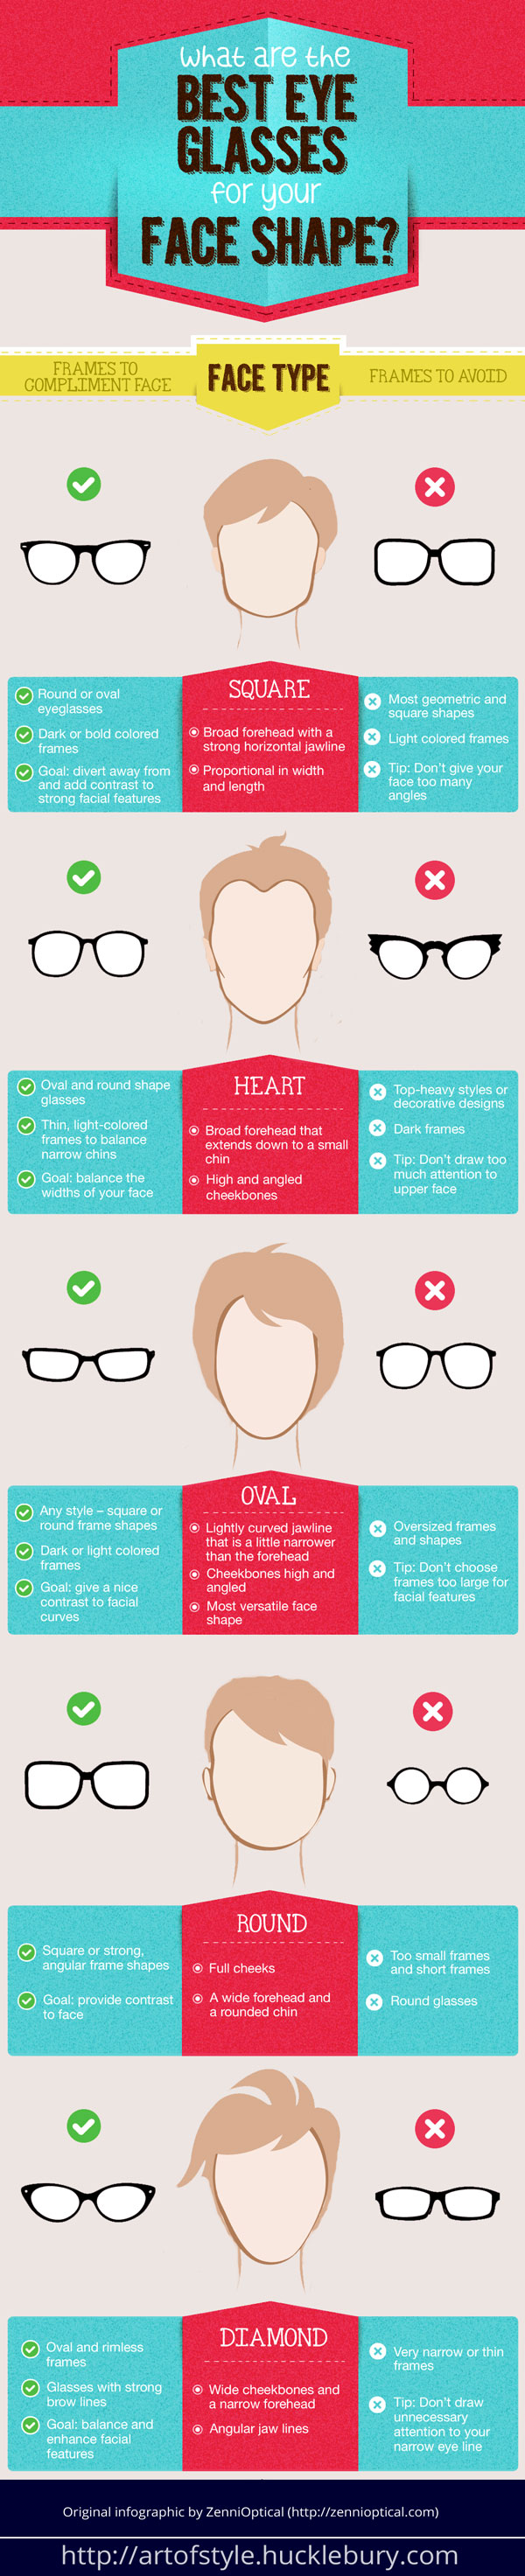 Choosing the Best Spectacle Frames - Infographic